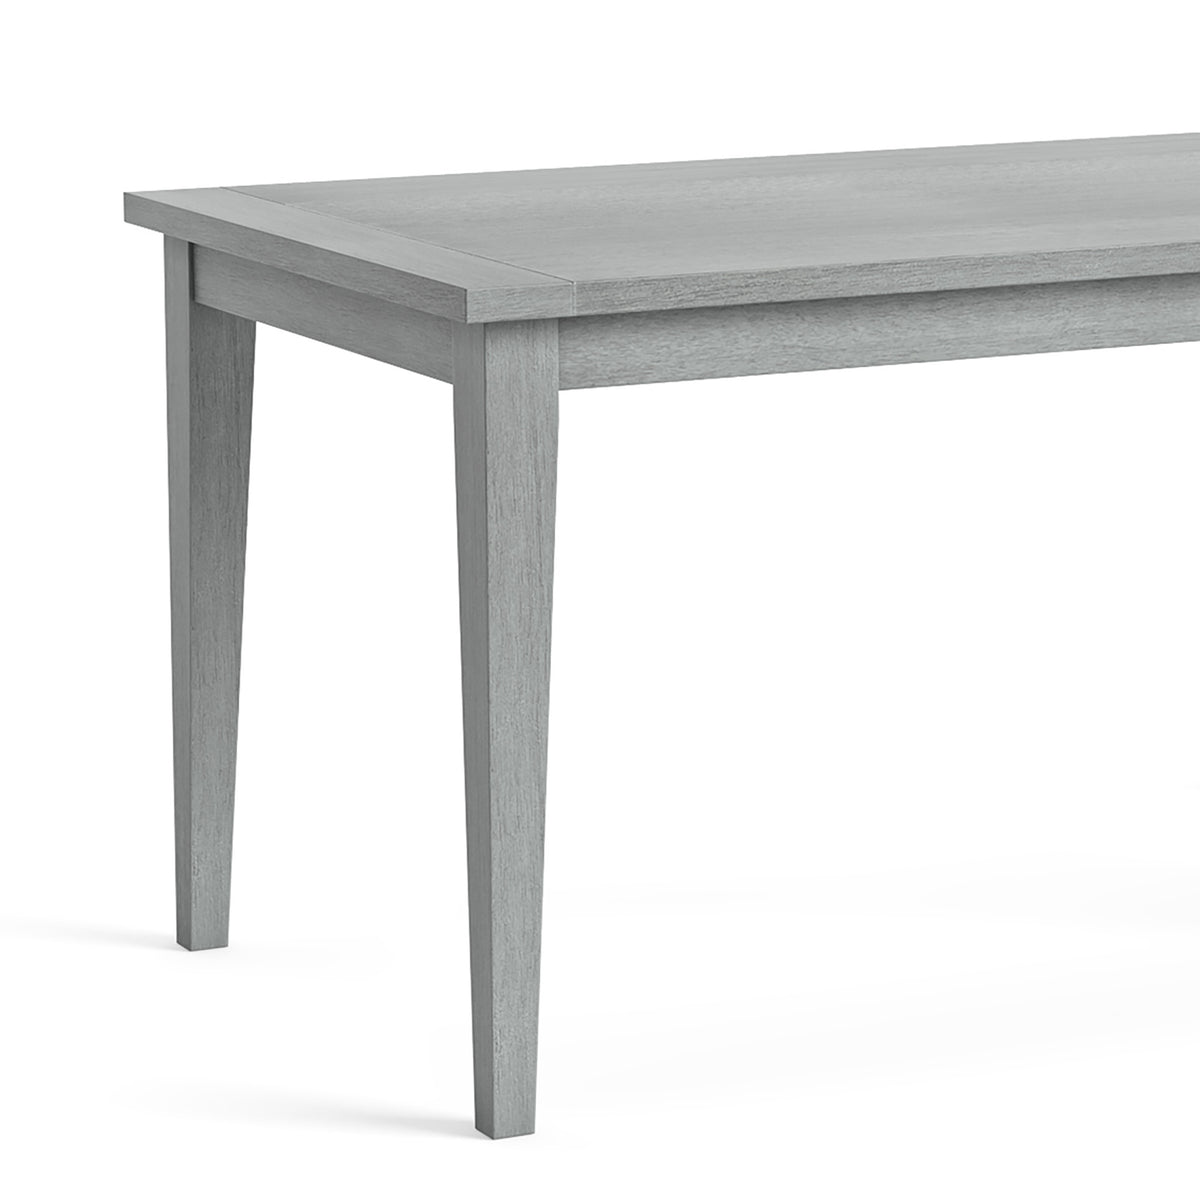 Elise Gris Grey Acacia 150cm Fixed Dining Table close up of legs